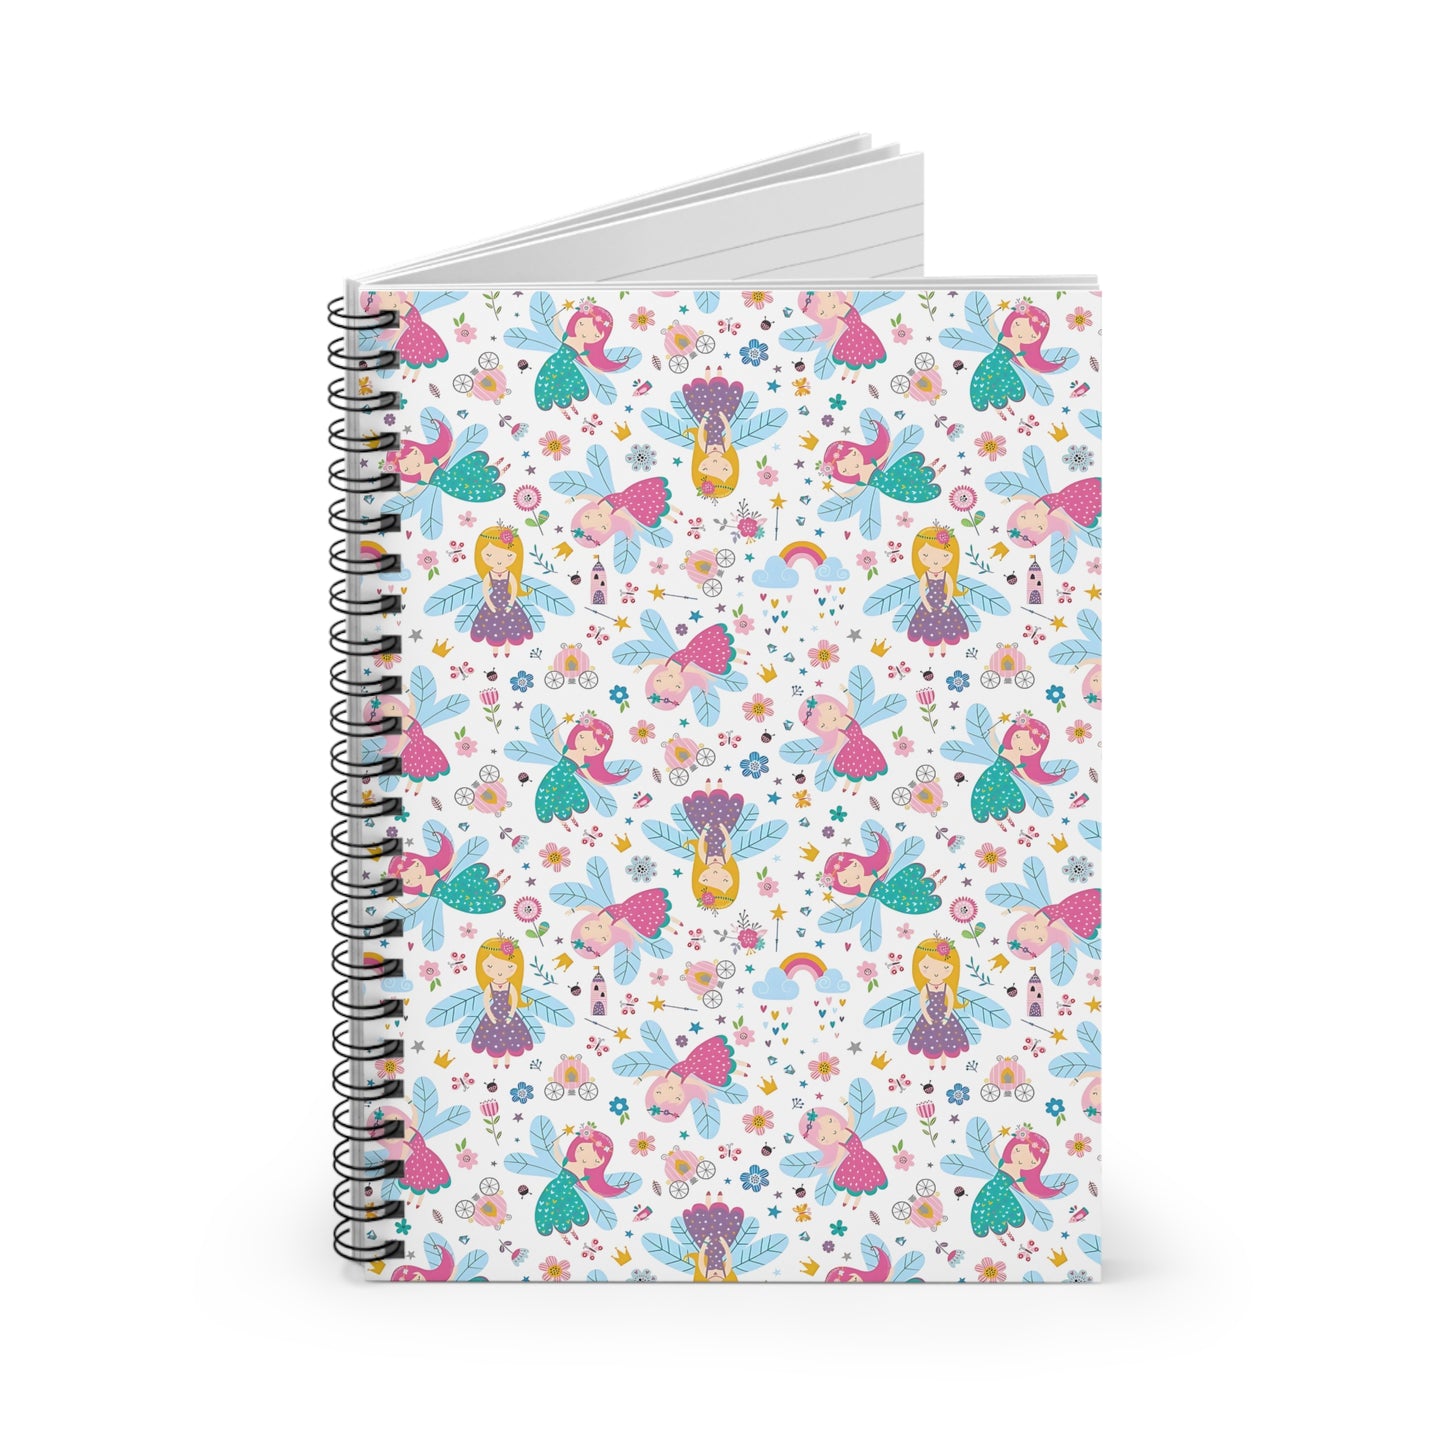 Fairy Spiral Notebook - Ruled Line